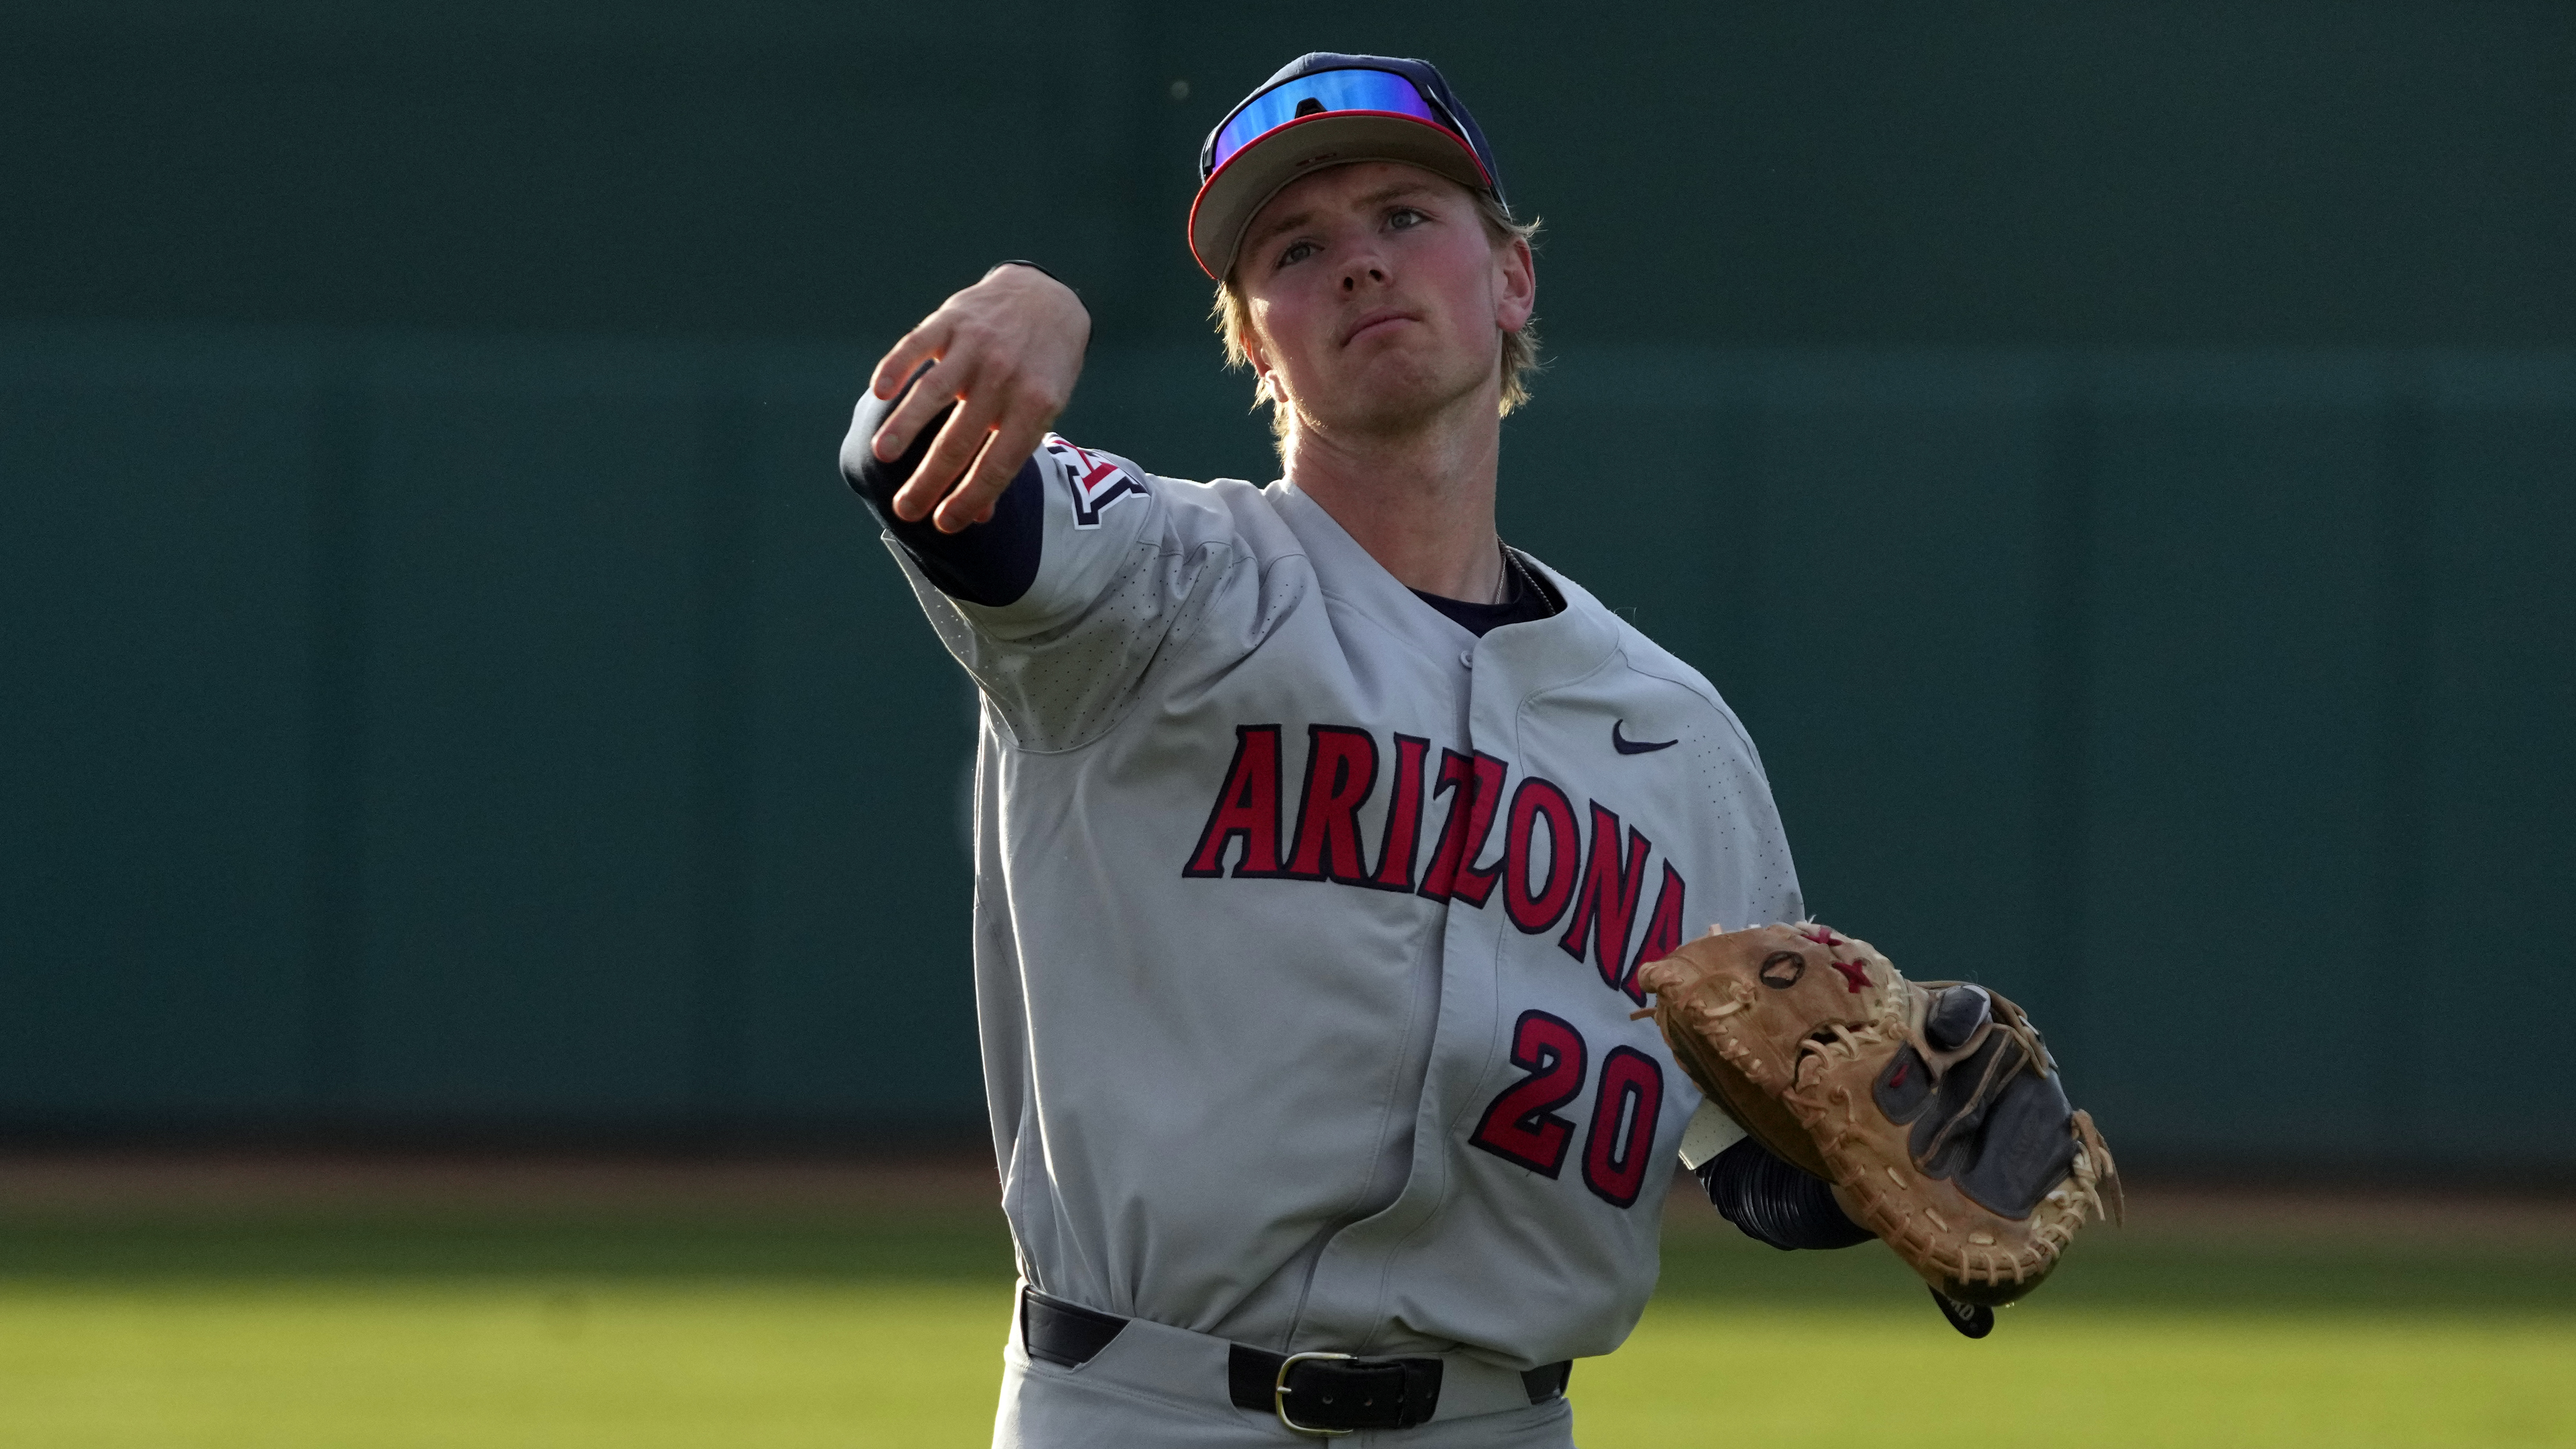 Arizona catcher Tommy Splaine (20) during an NCAA baseball game against Grand Canyon.